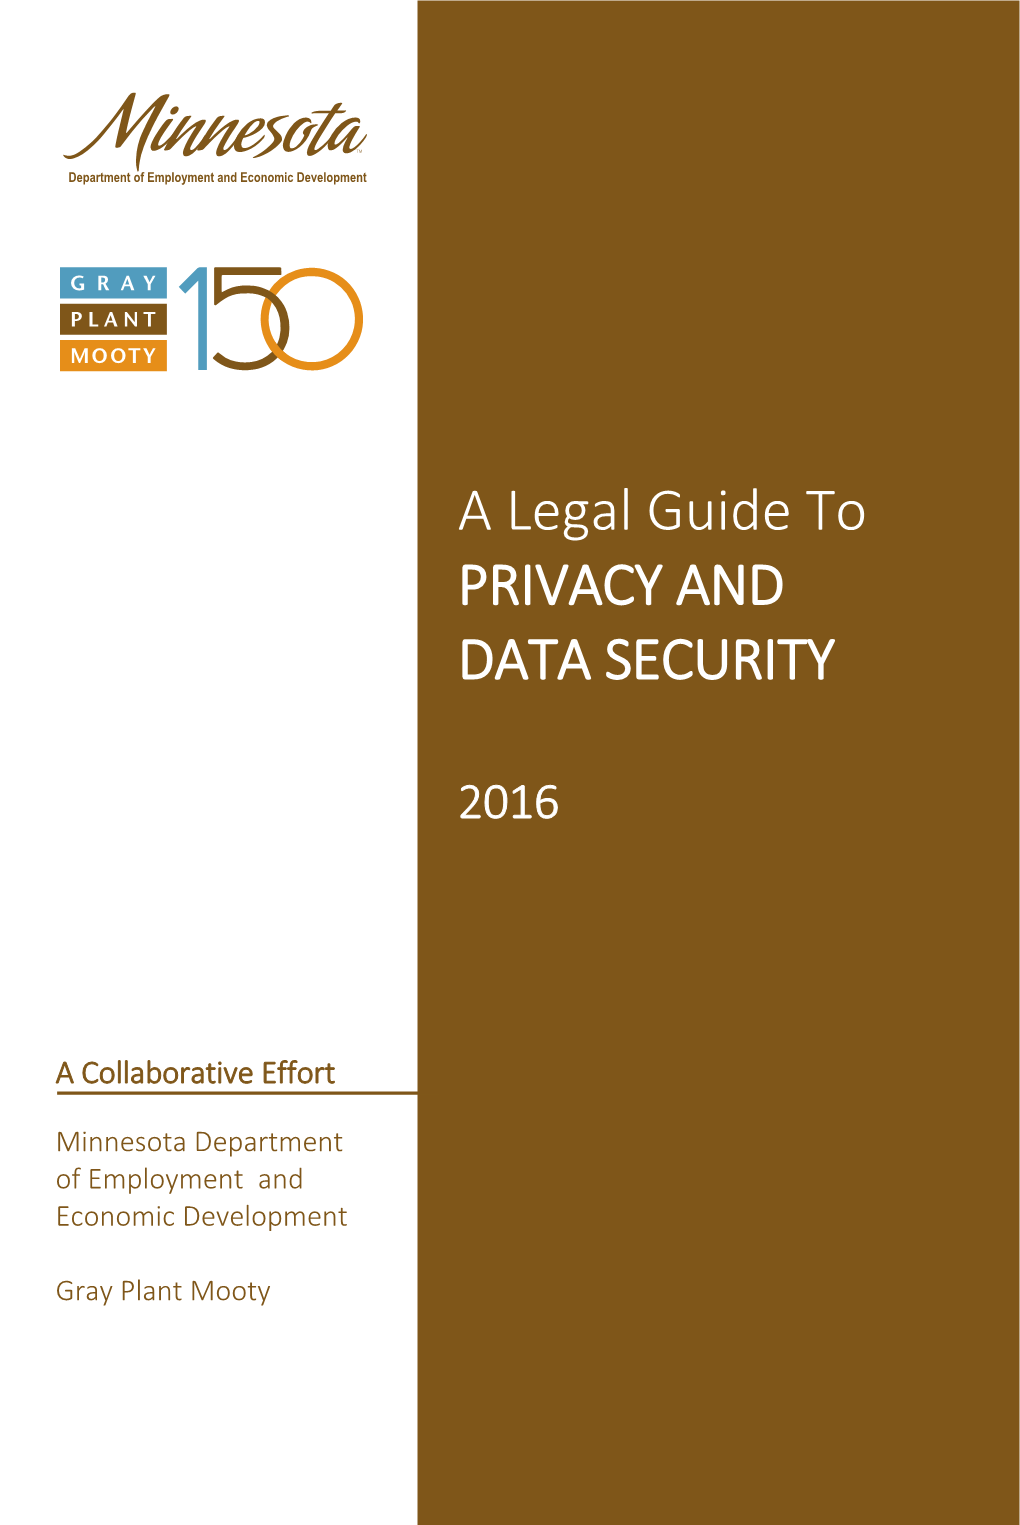 A Legal Guide to Privacy and Data Security 2016